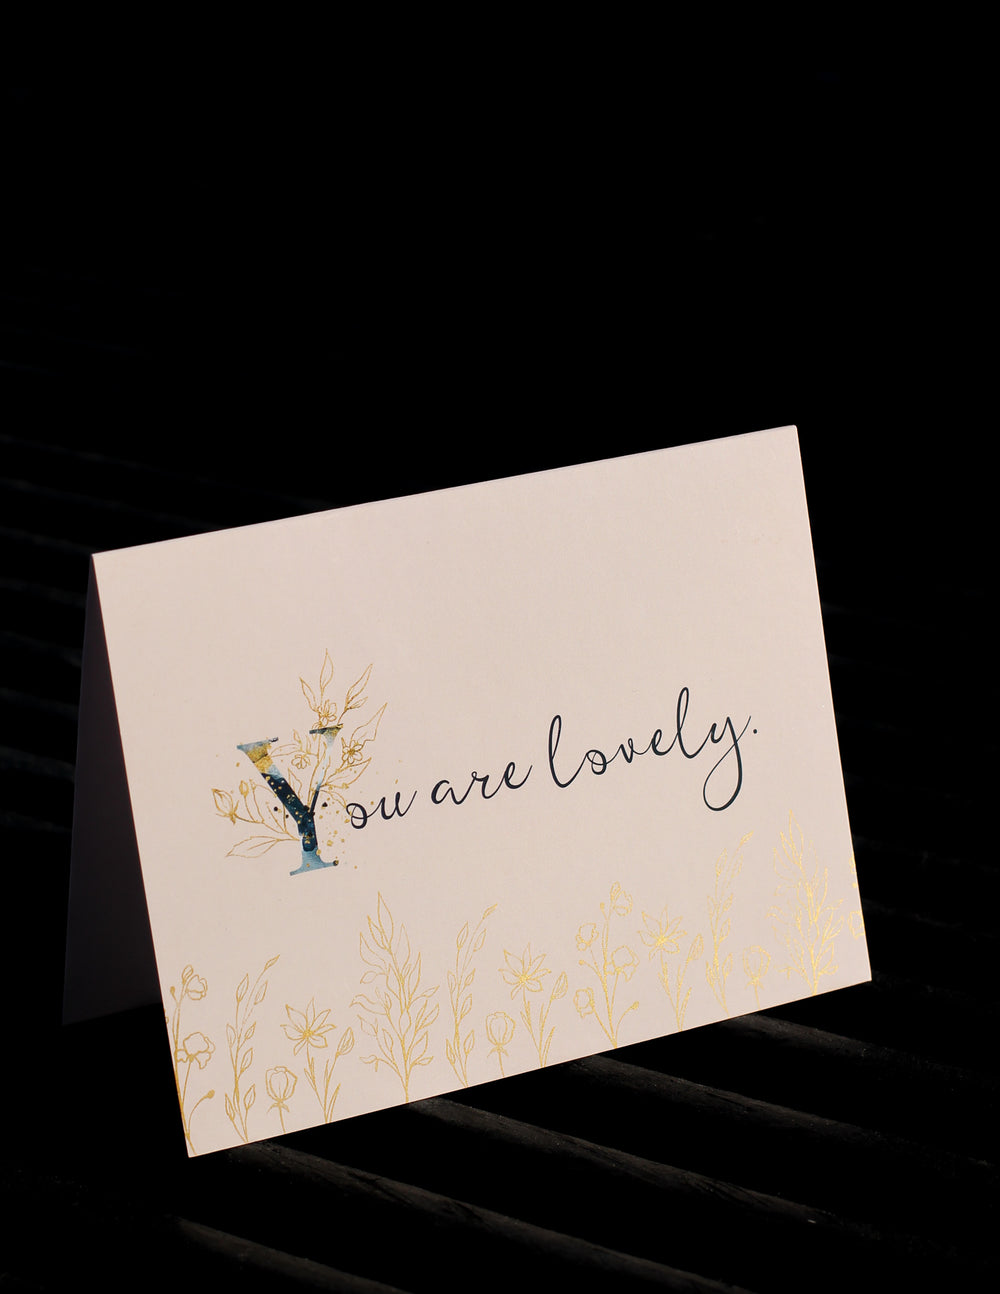 You are Lovely Greeting Card - Pretty Sick Designs